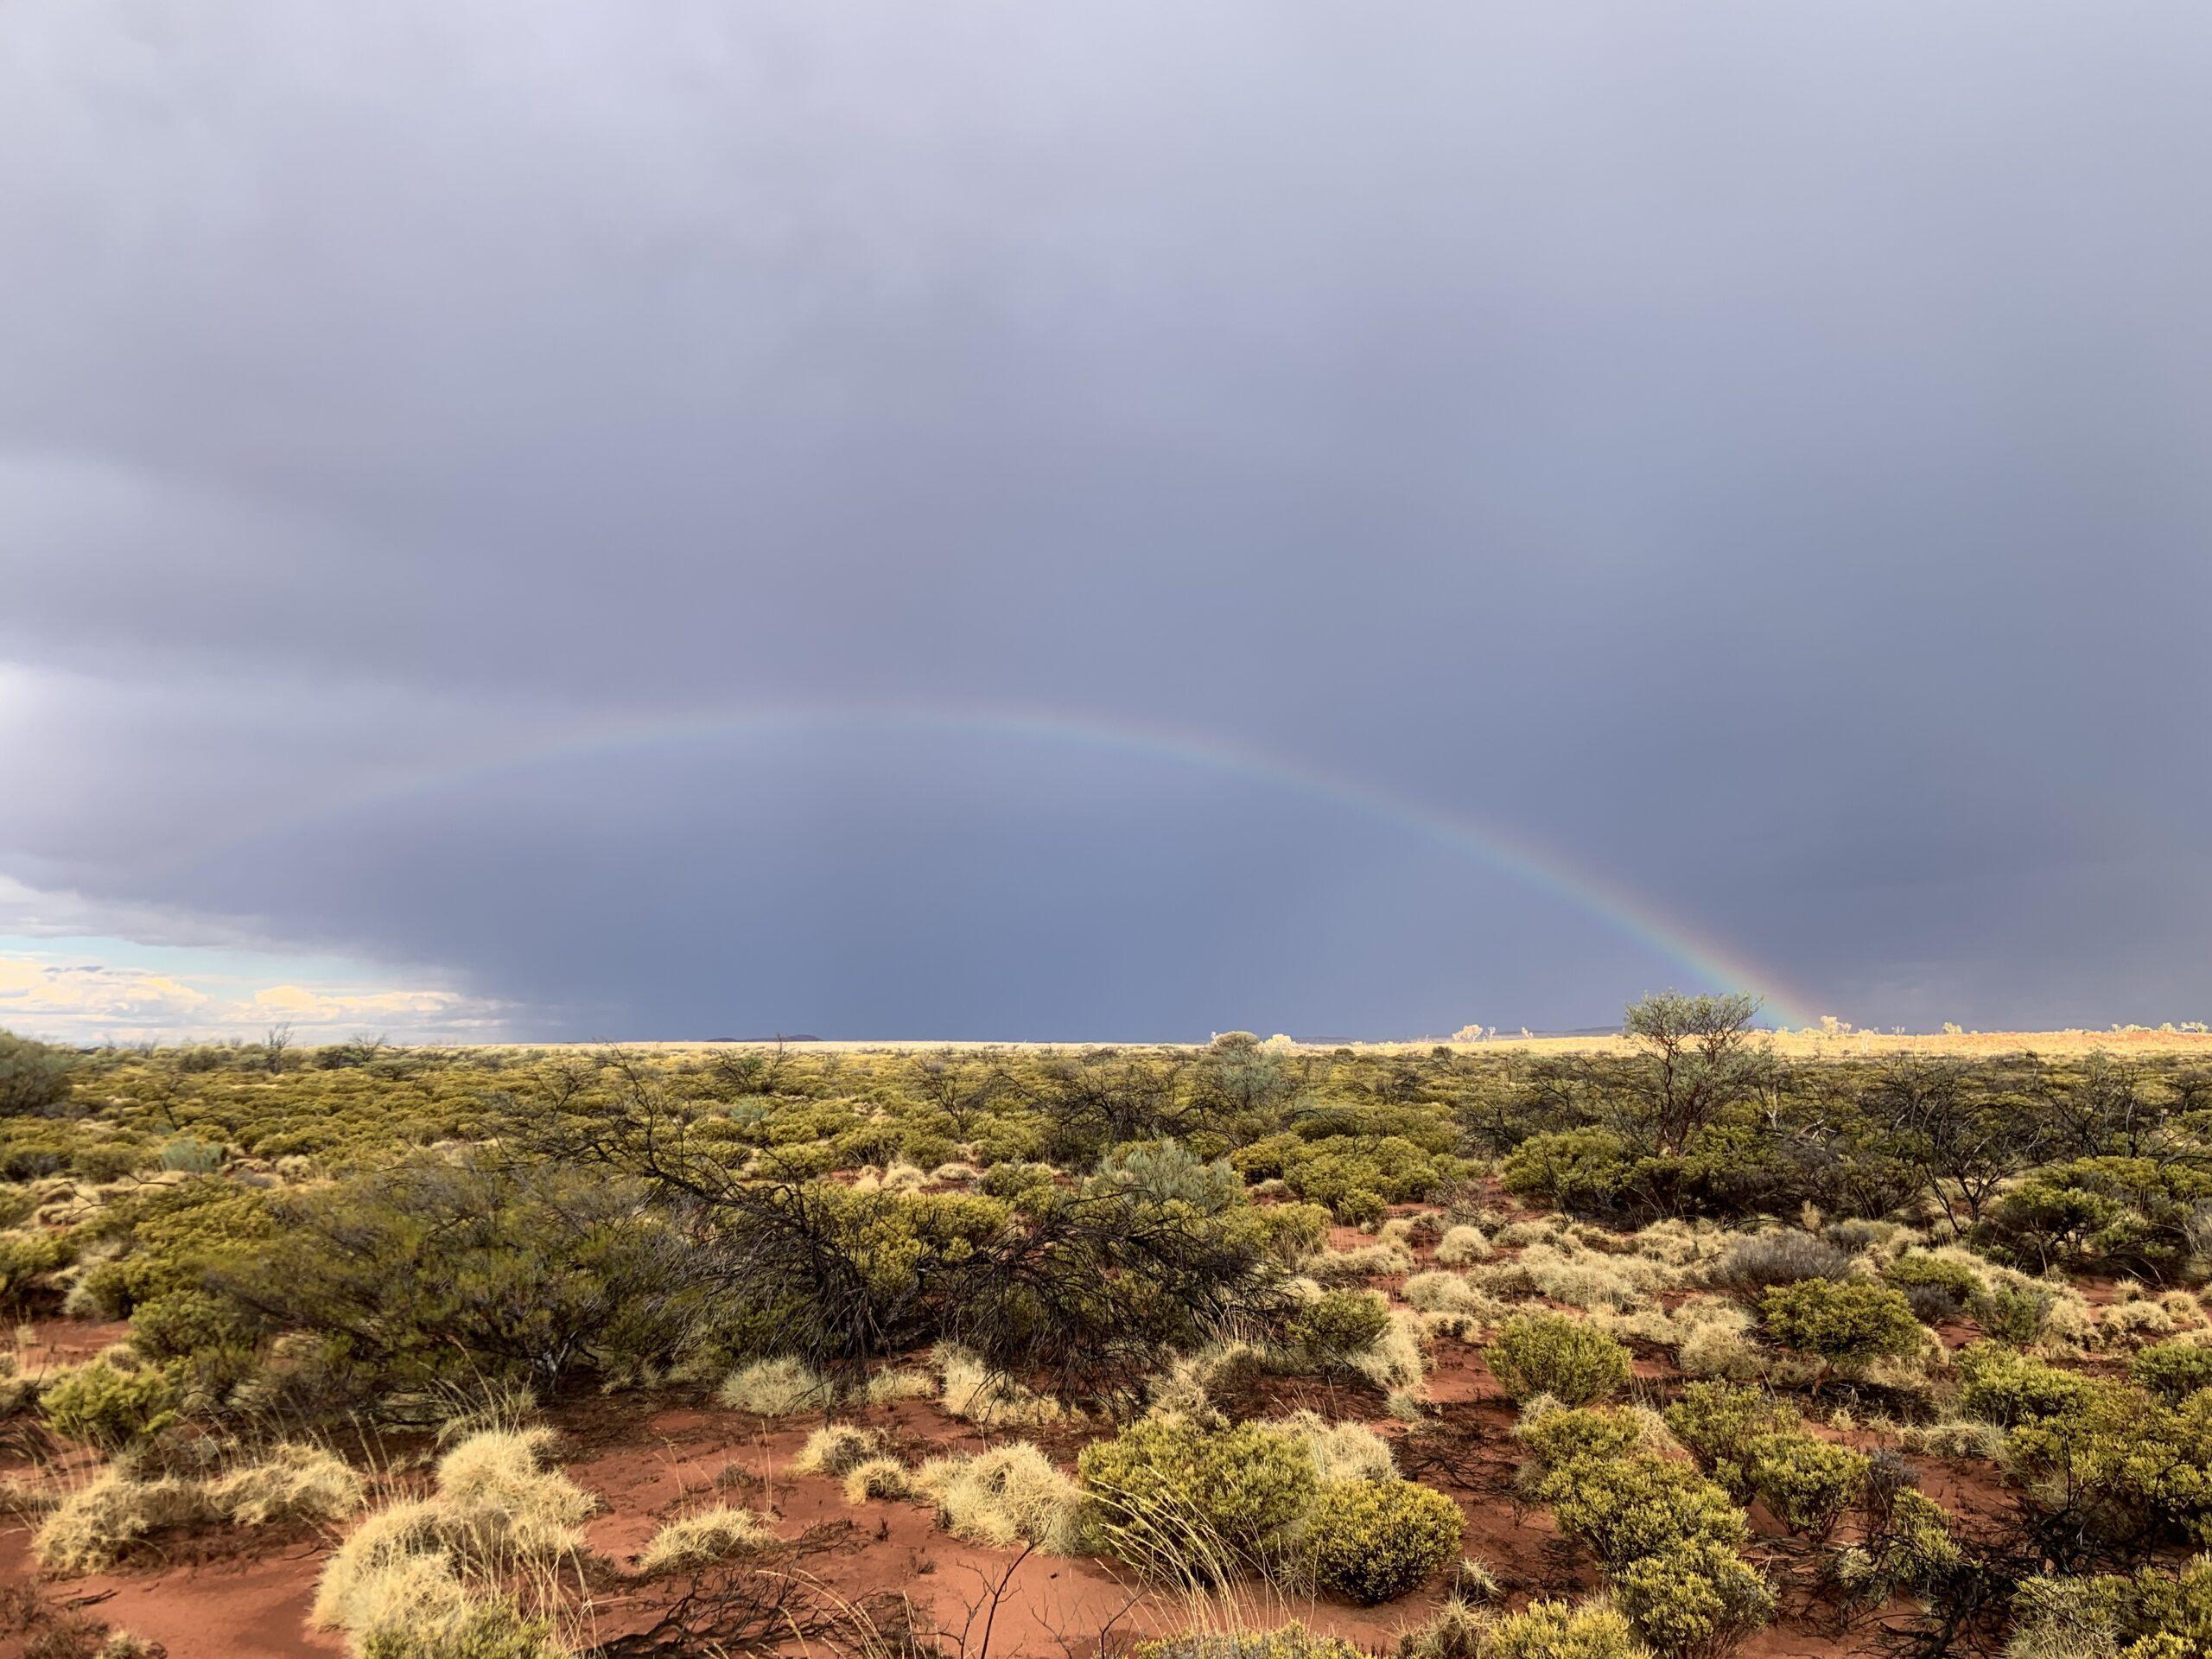 A rainbow shining over resilient desert landscapes